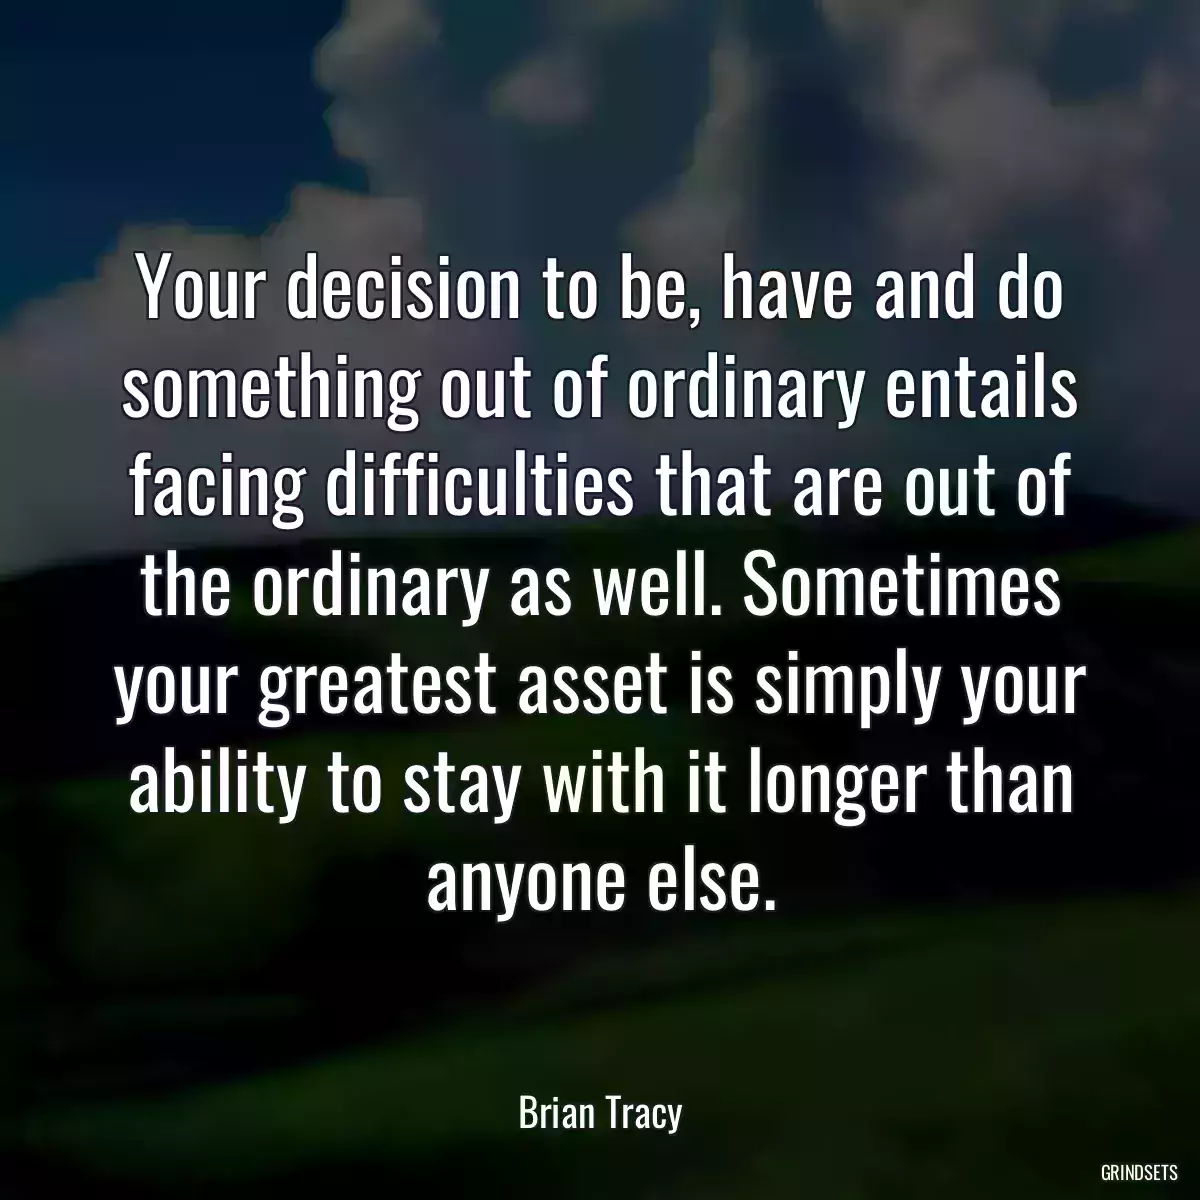 Your decision to be, have and do something out of ordinary entails facing difficulties that are out of the ordinary as well. Sometimes your greatest asset is simply your ability to stay with it longer than anyone else.